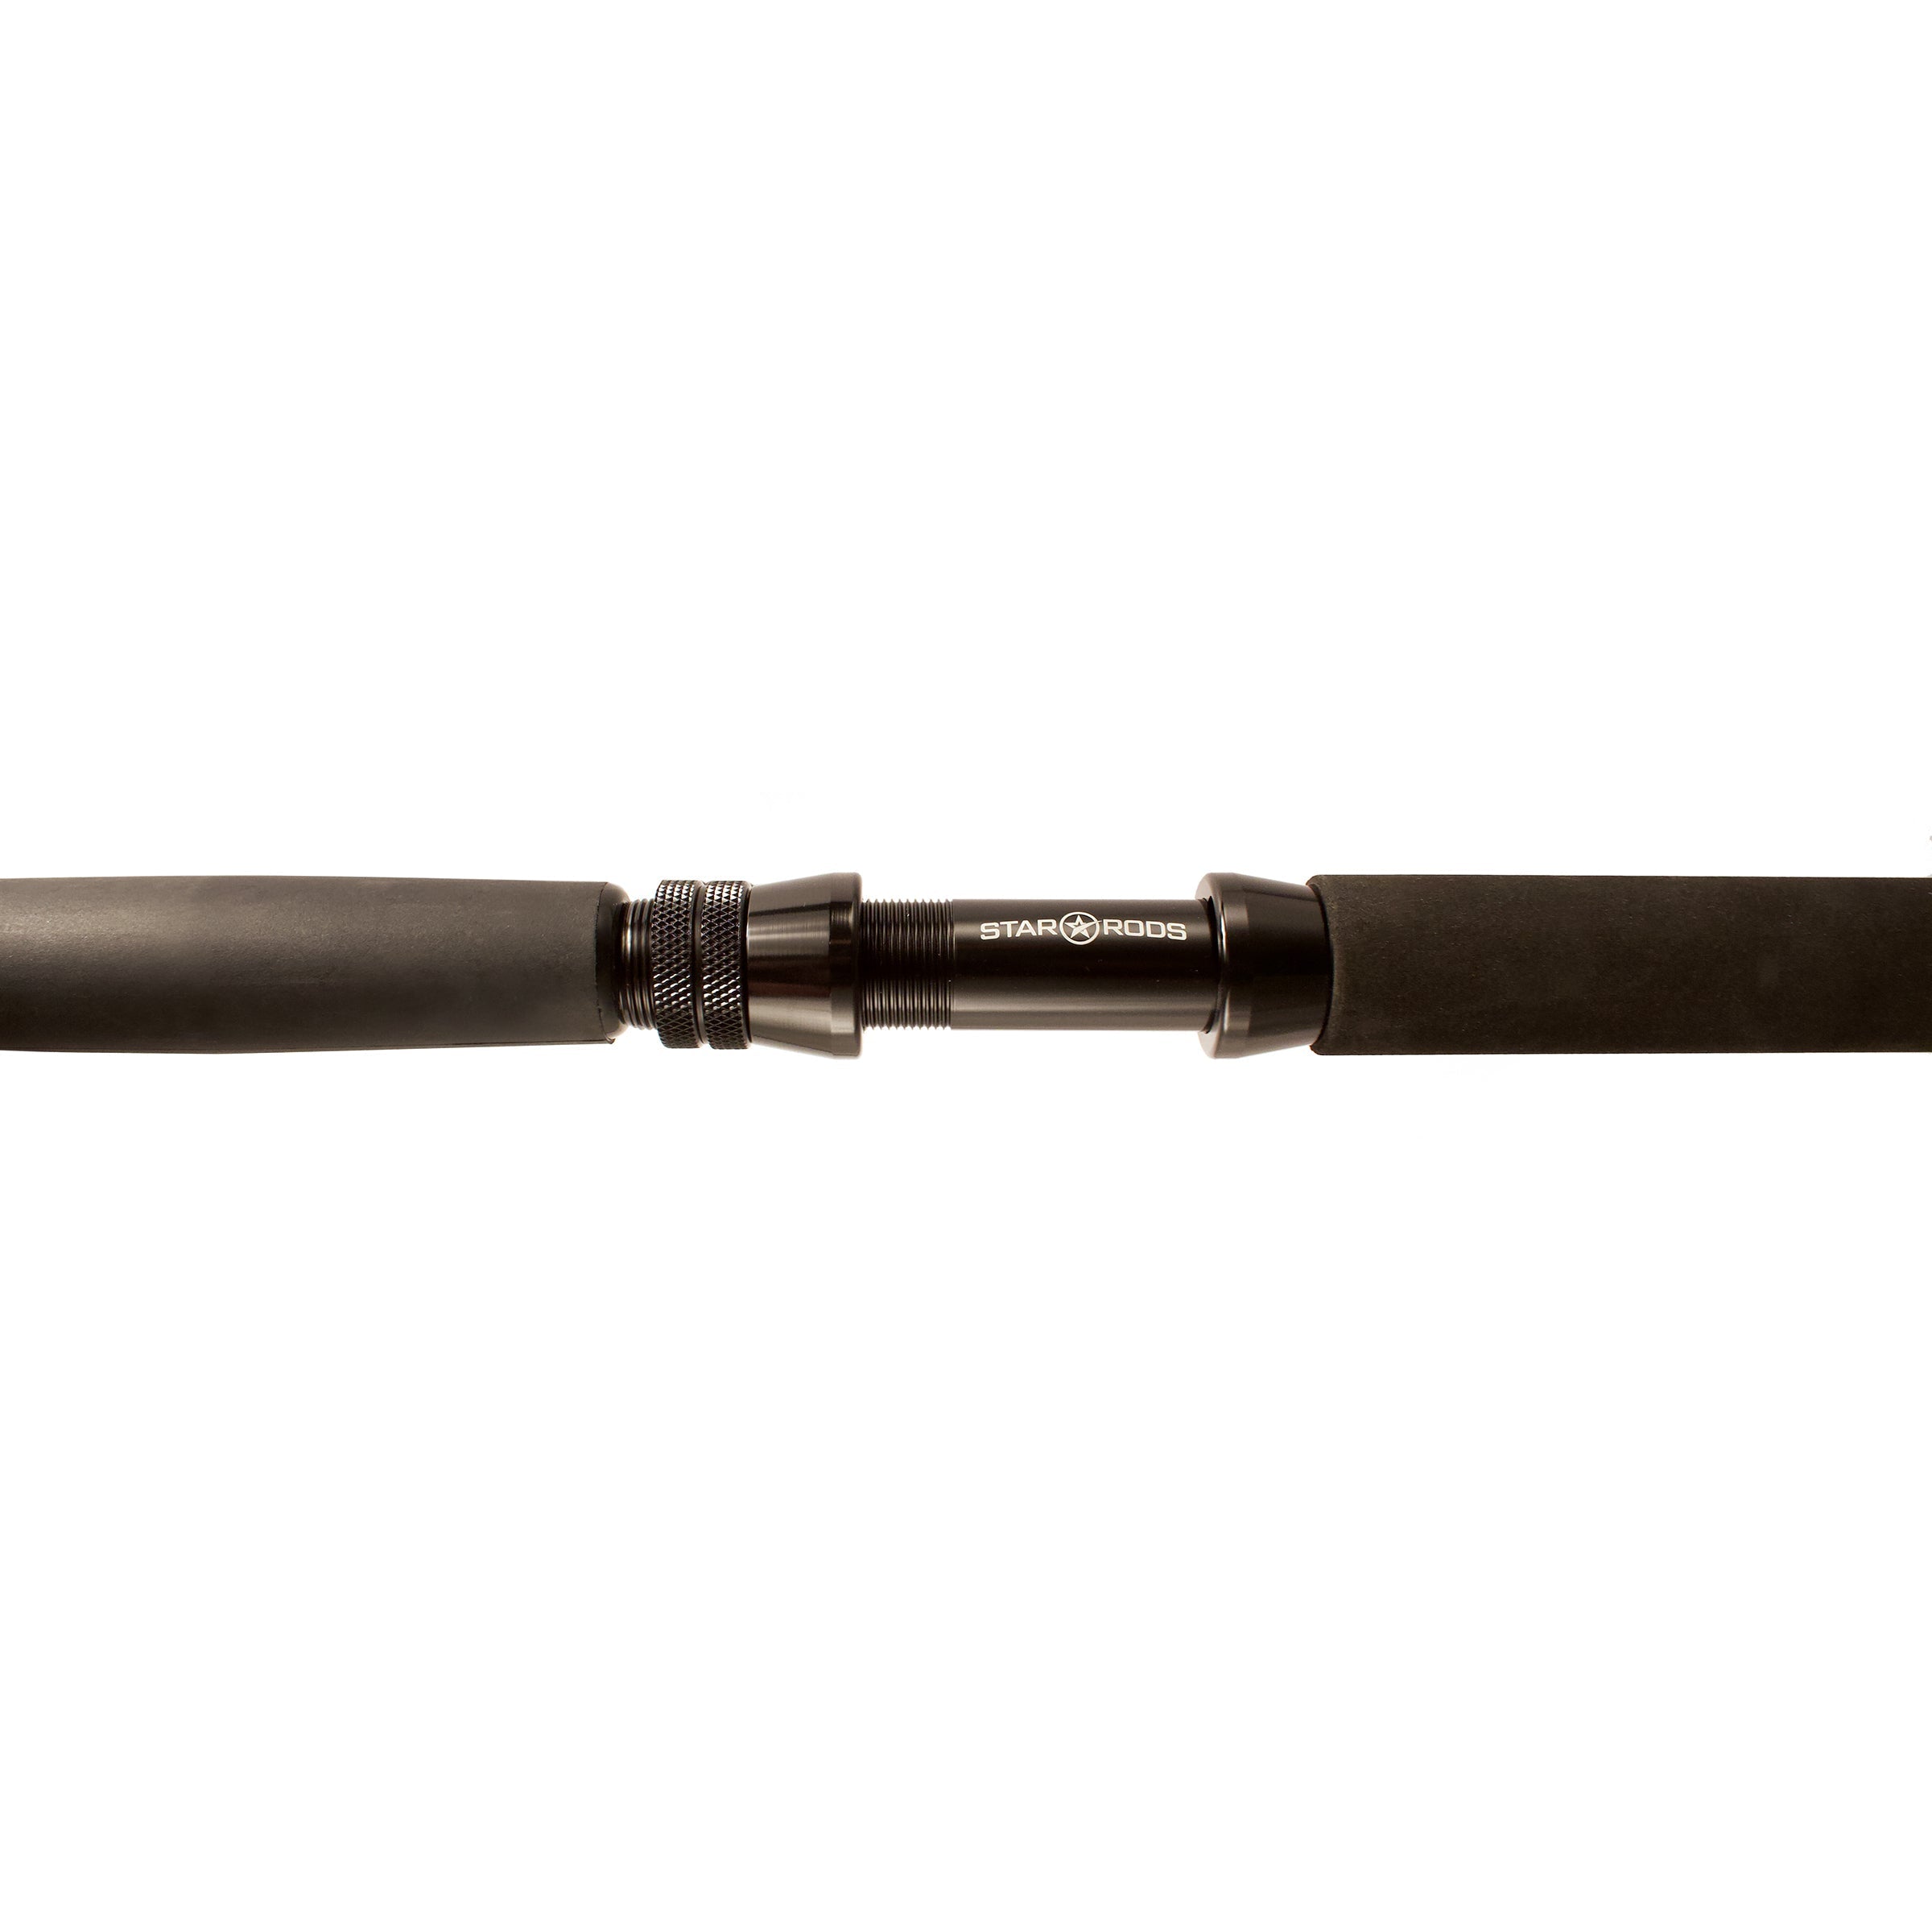 Star Rods Ariel Stand-up Rods